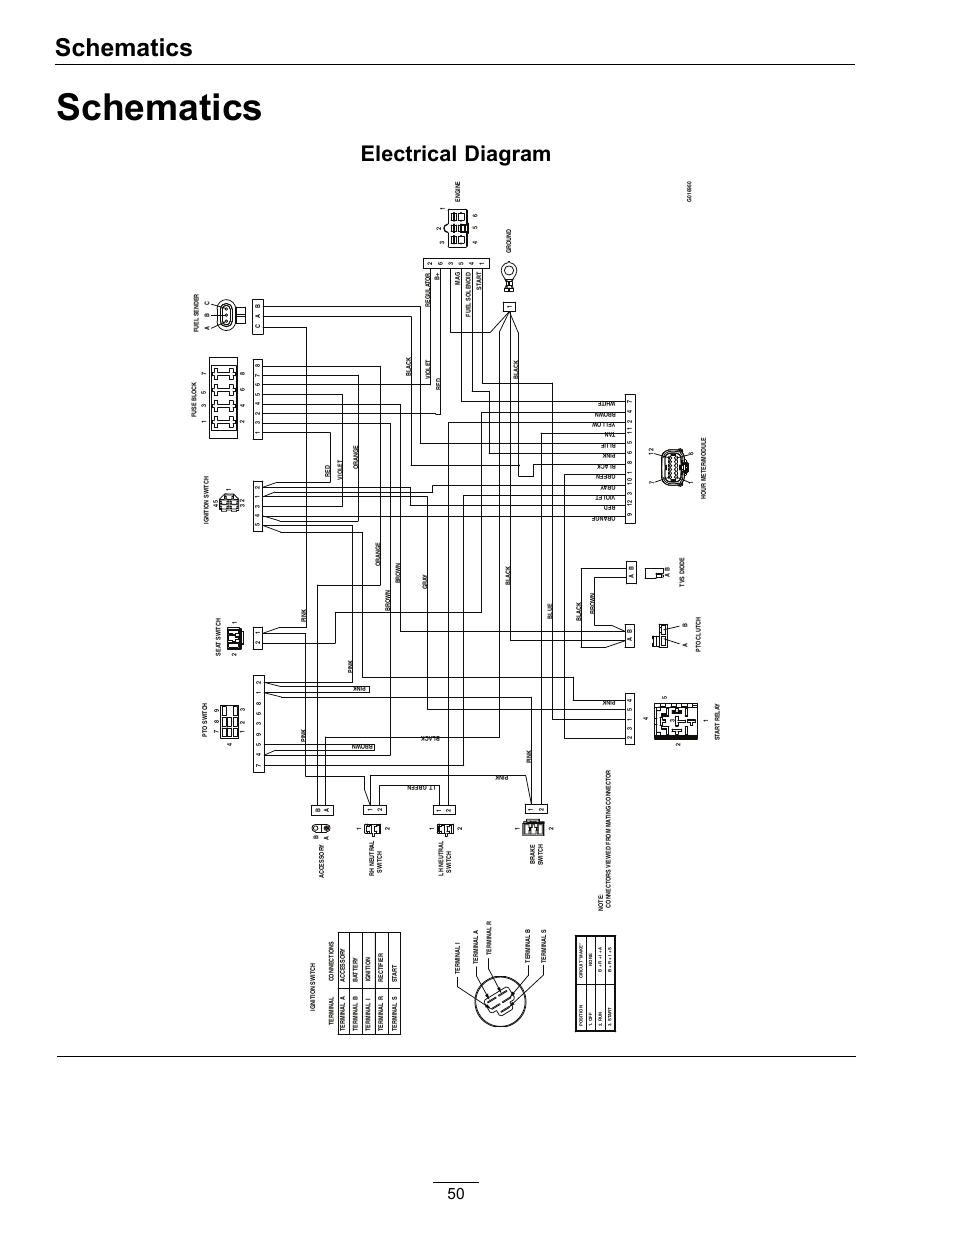 wiring diagram for ac6000 with qsi